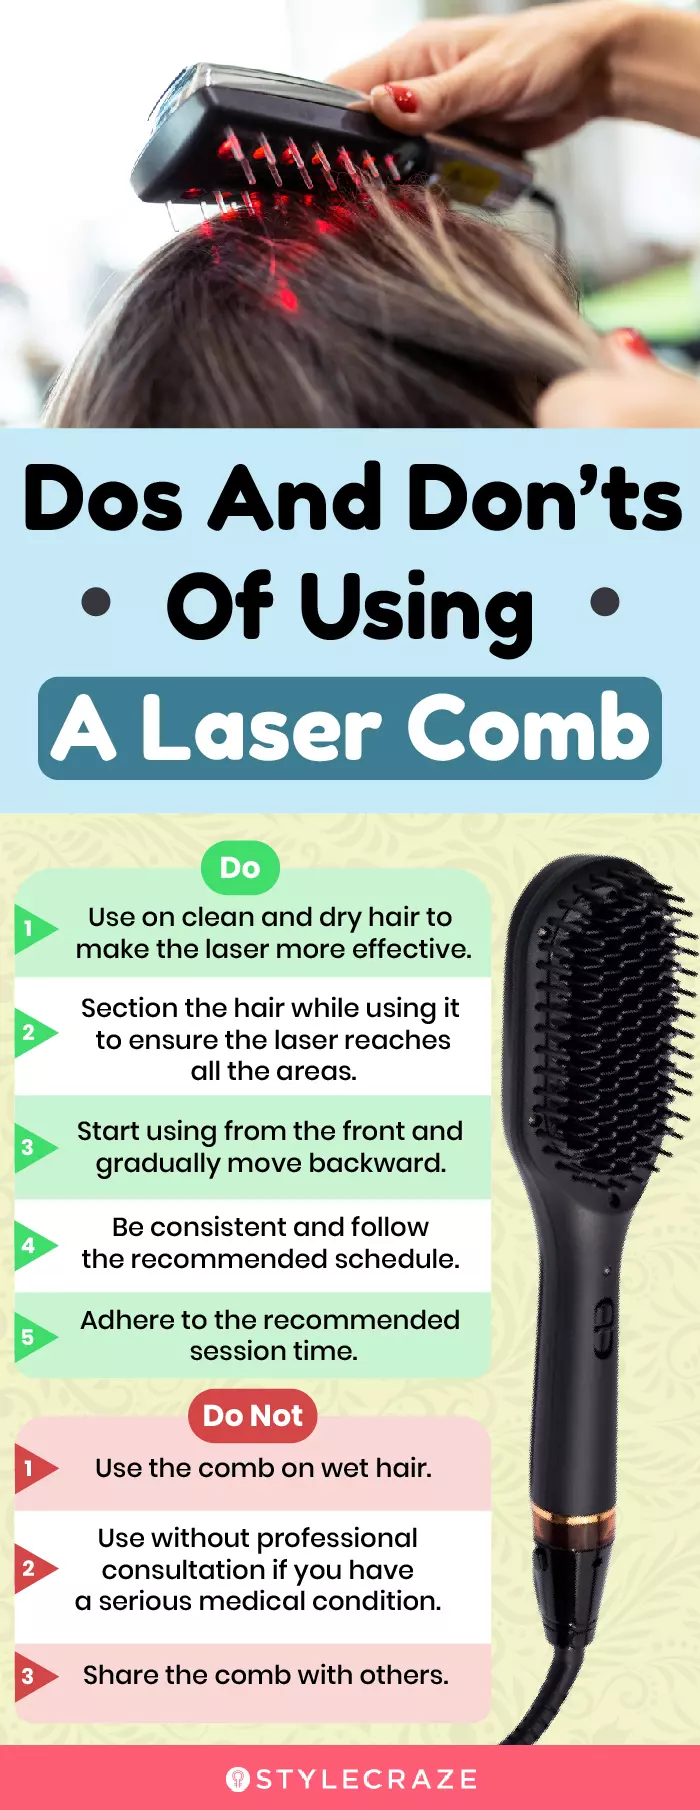 Dos And Don’ts Of Using A Laser Comb (infographic)